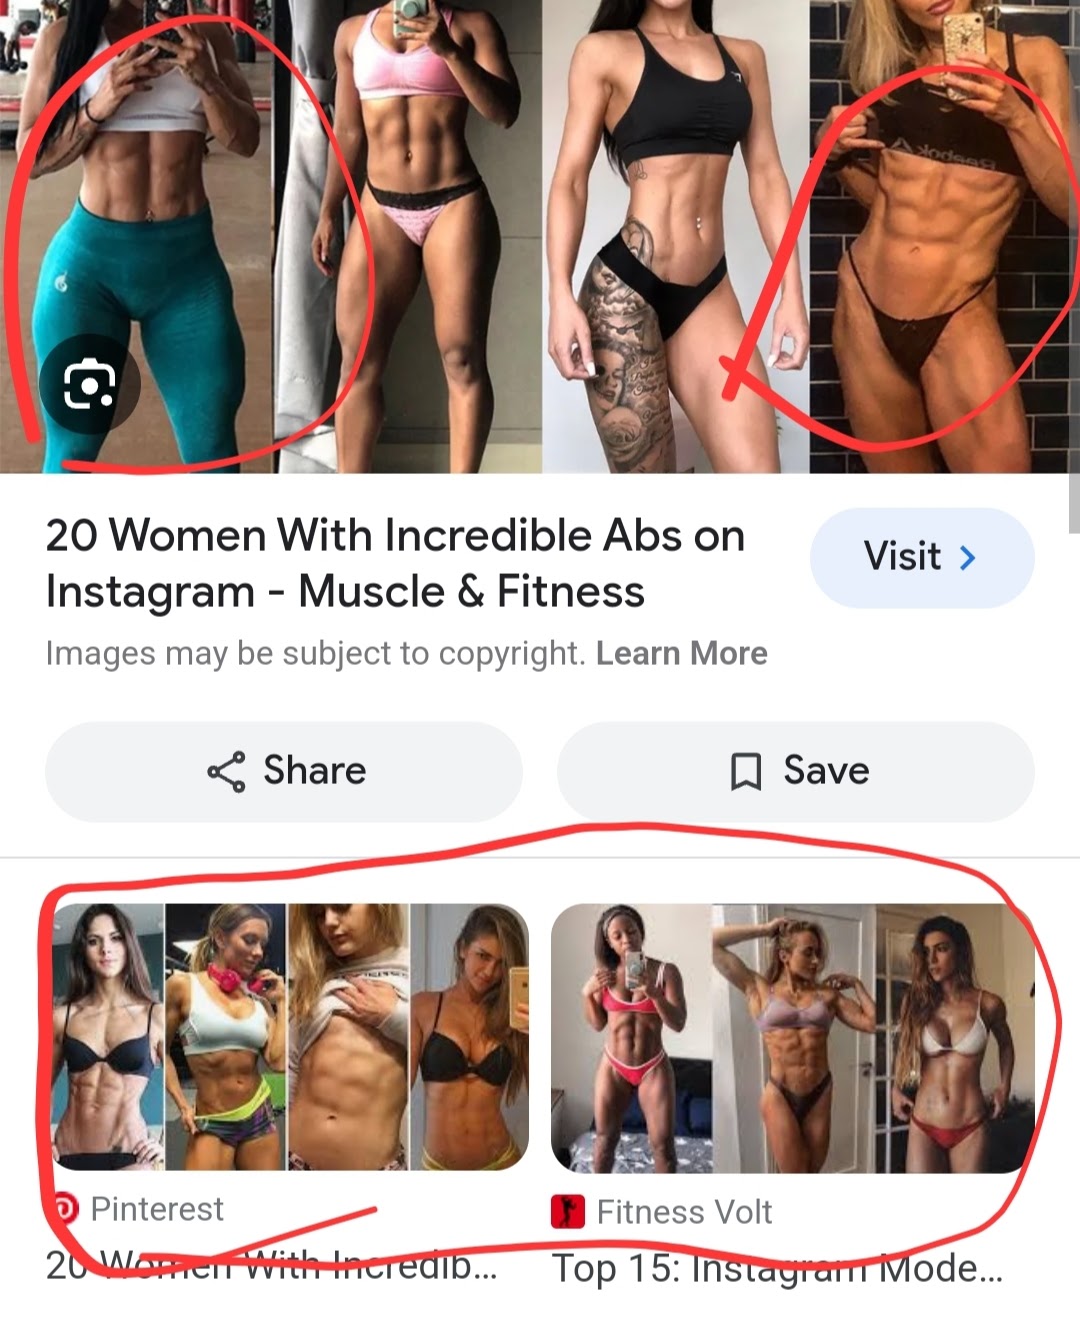 20 Women With Incredible Abs on Instagram - Muscle & Fitness